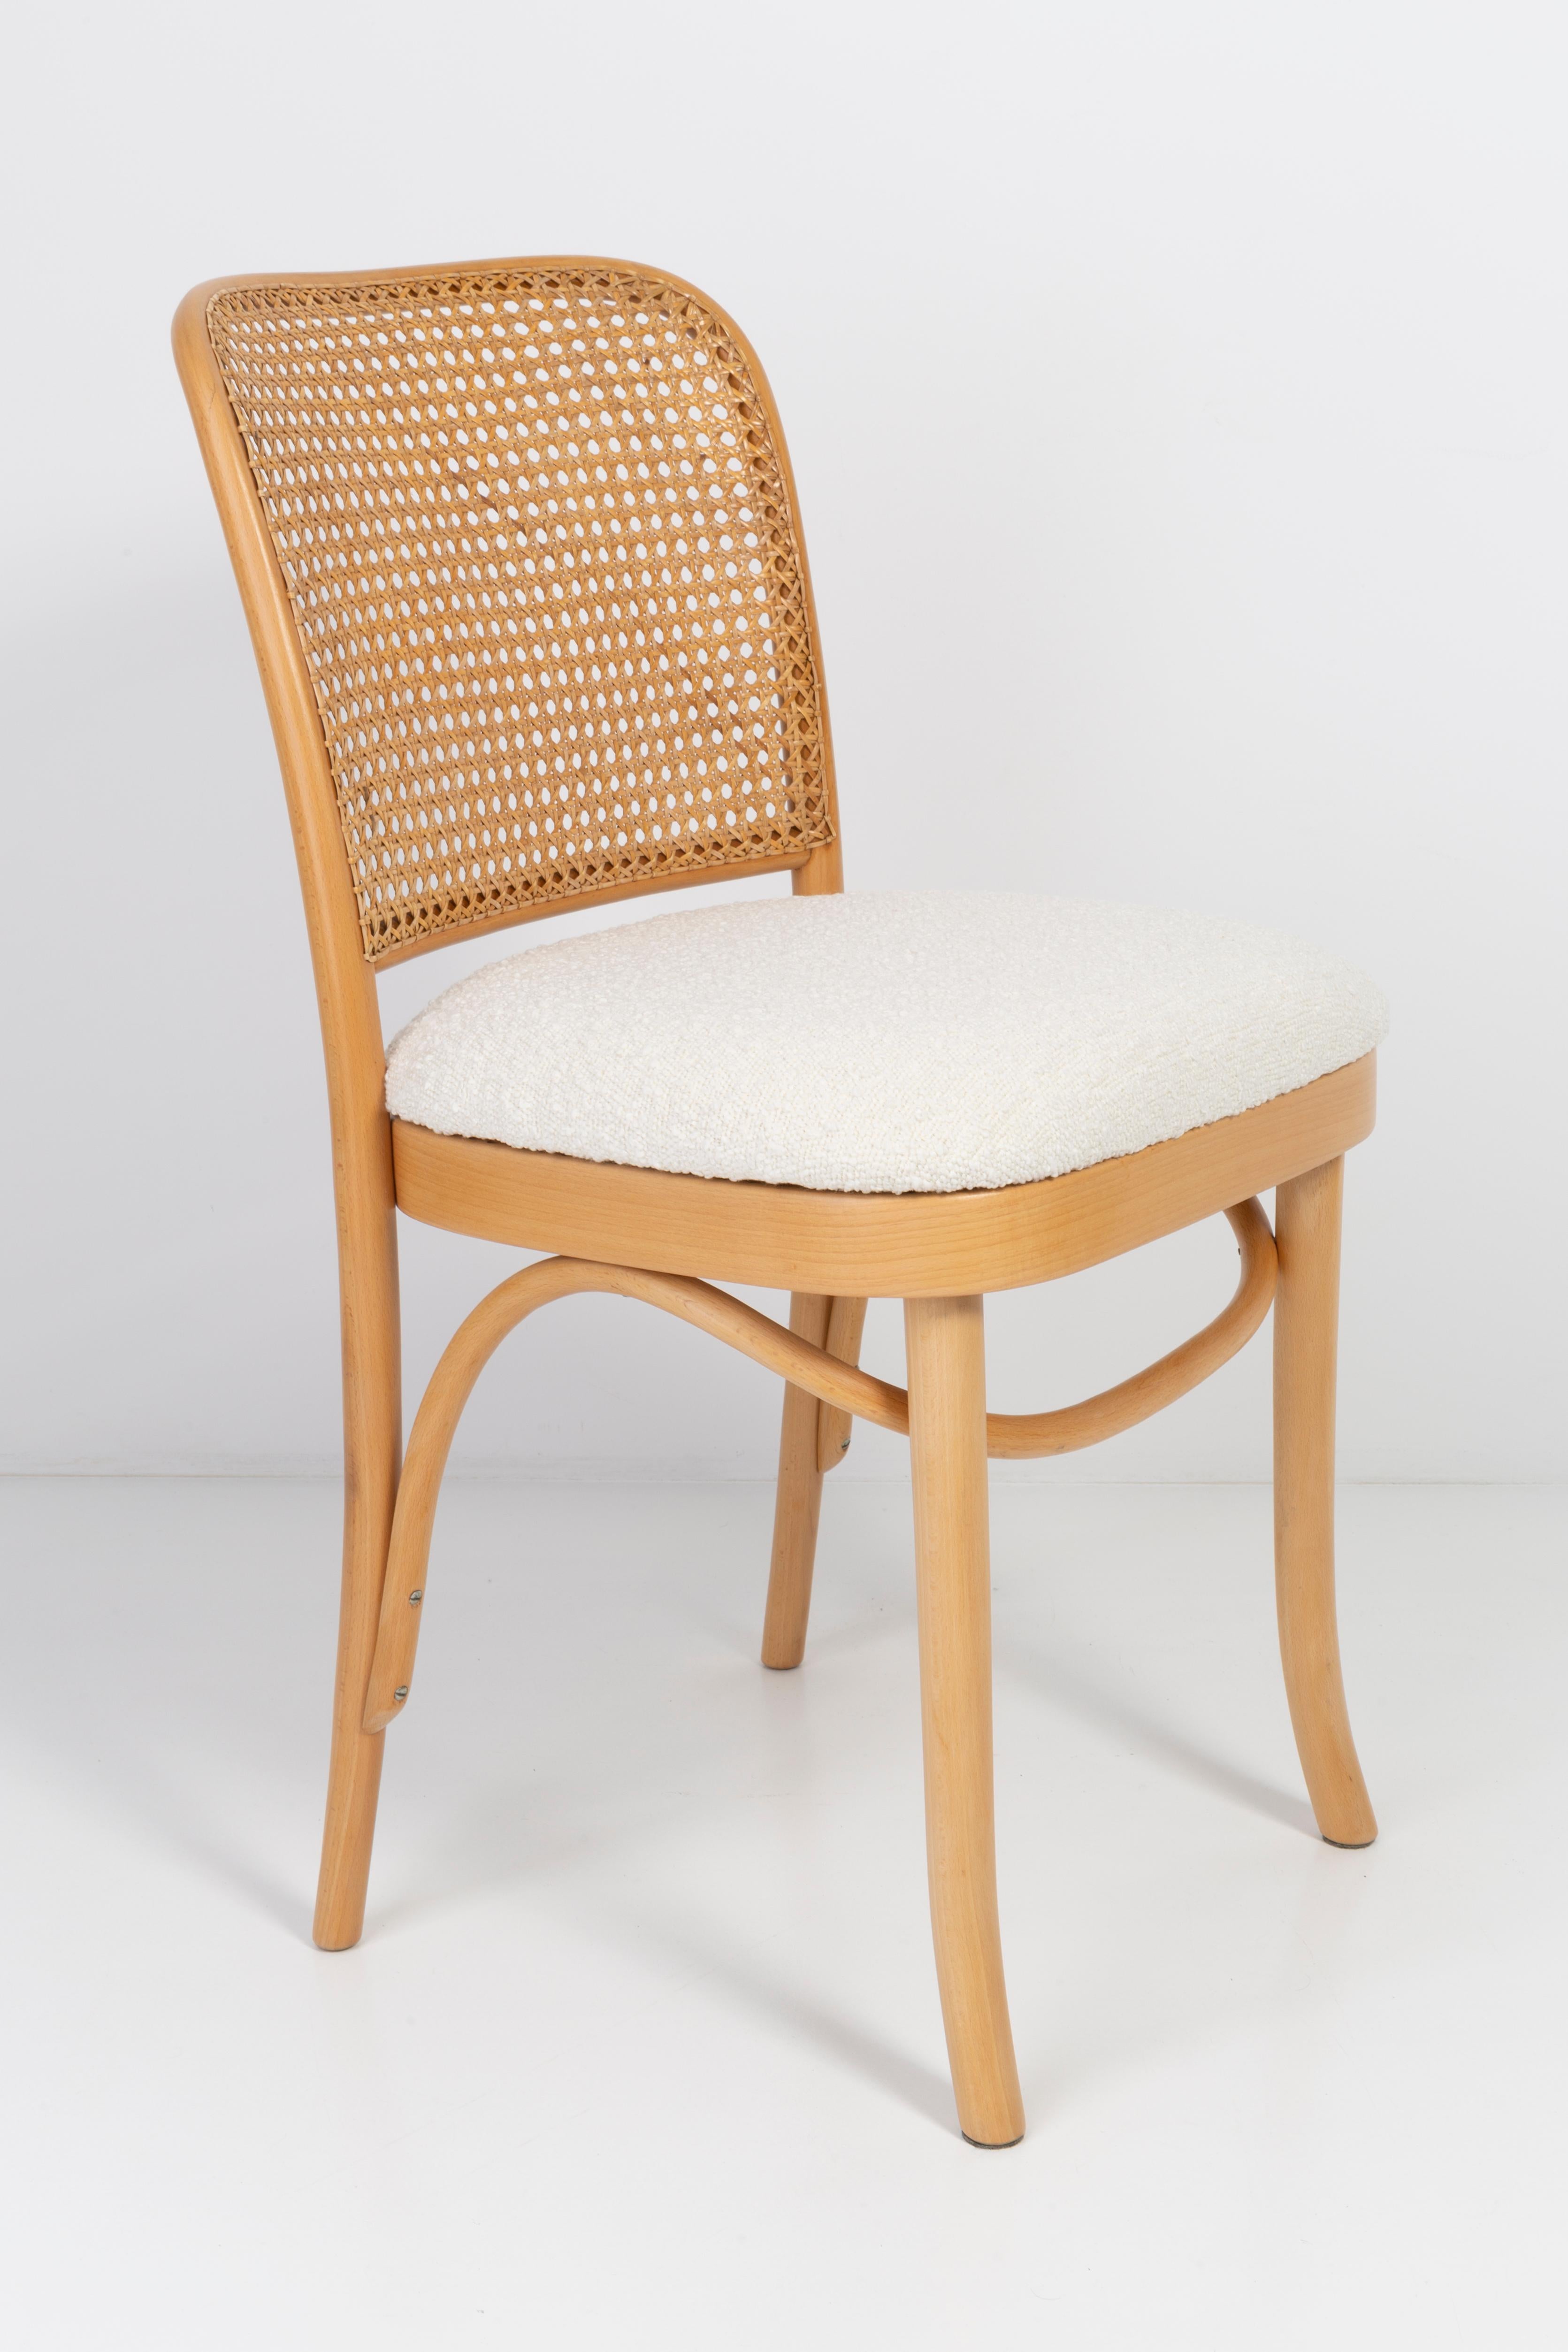 Velvet Set of Four White Boucle Thonet Wood Rattan Chairs, 1960s For Sale